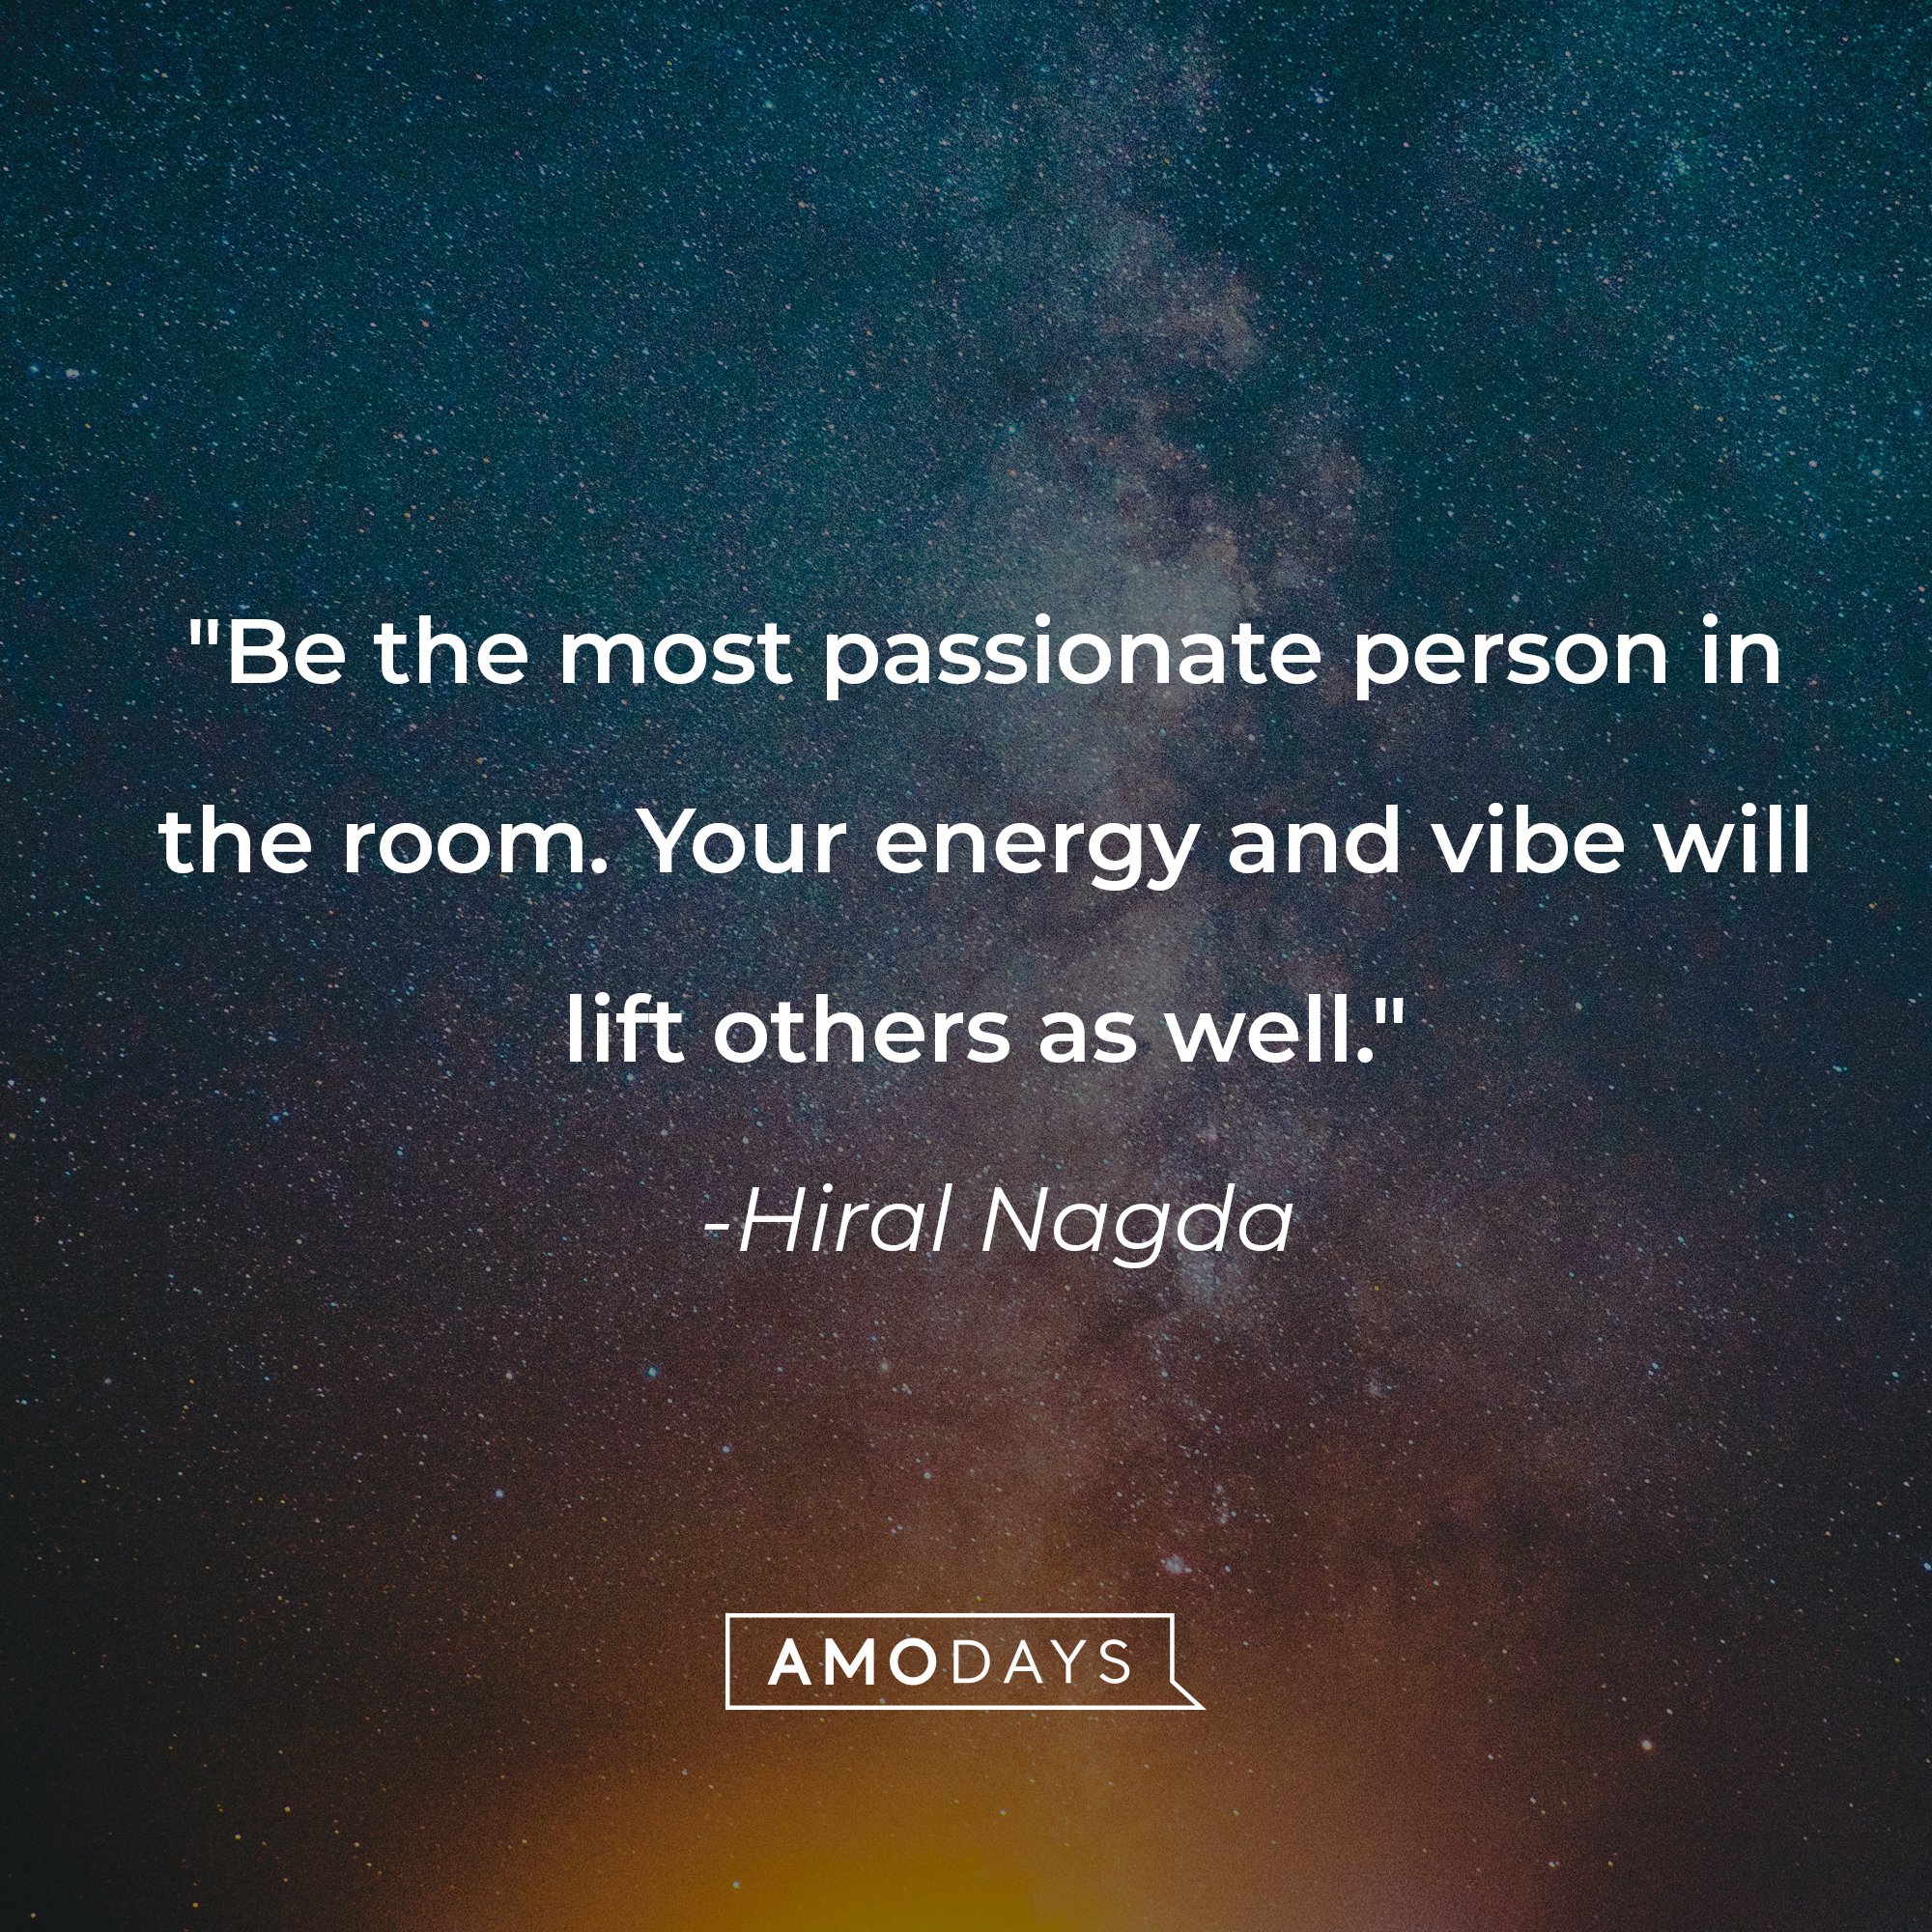 Hiral Nagda's quote: "Be the most passionate person in the room. Your energy and vibe will lift others as well." | Image: AmoDays